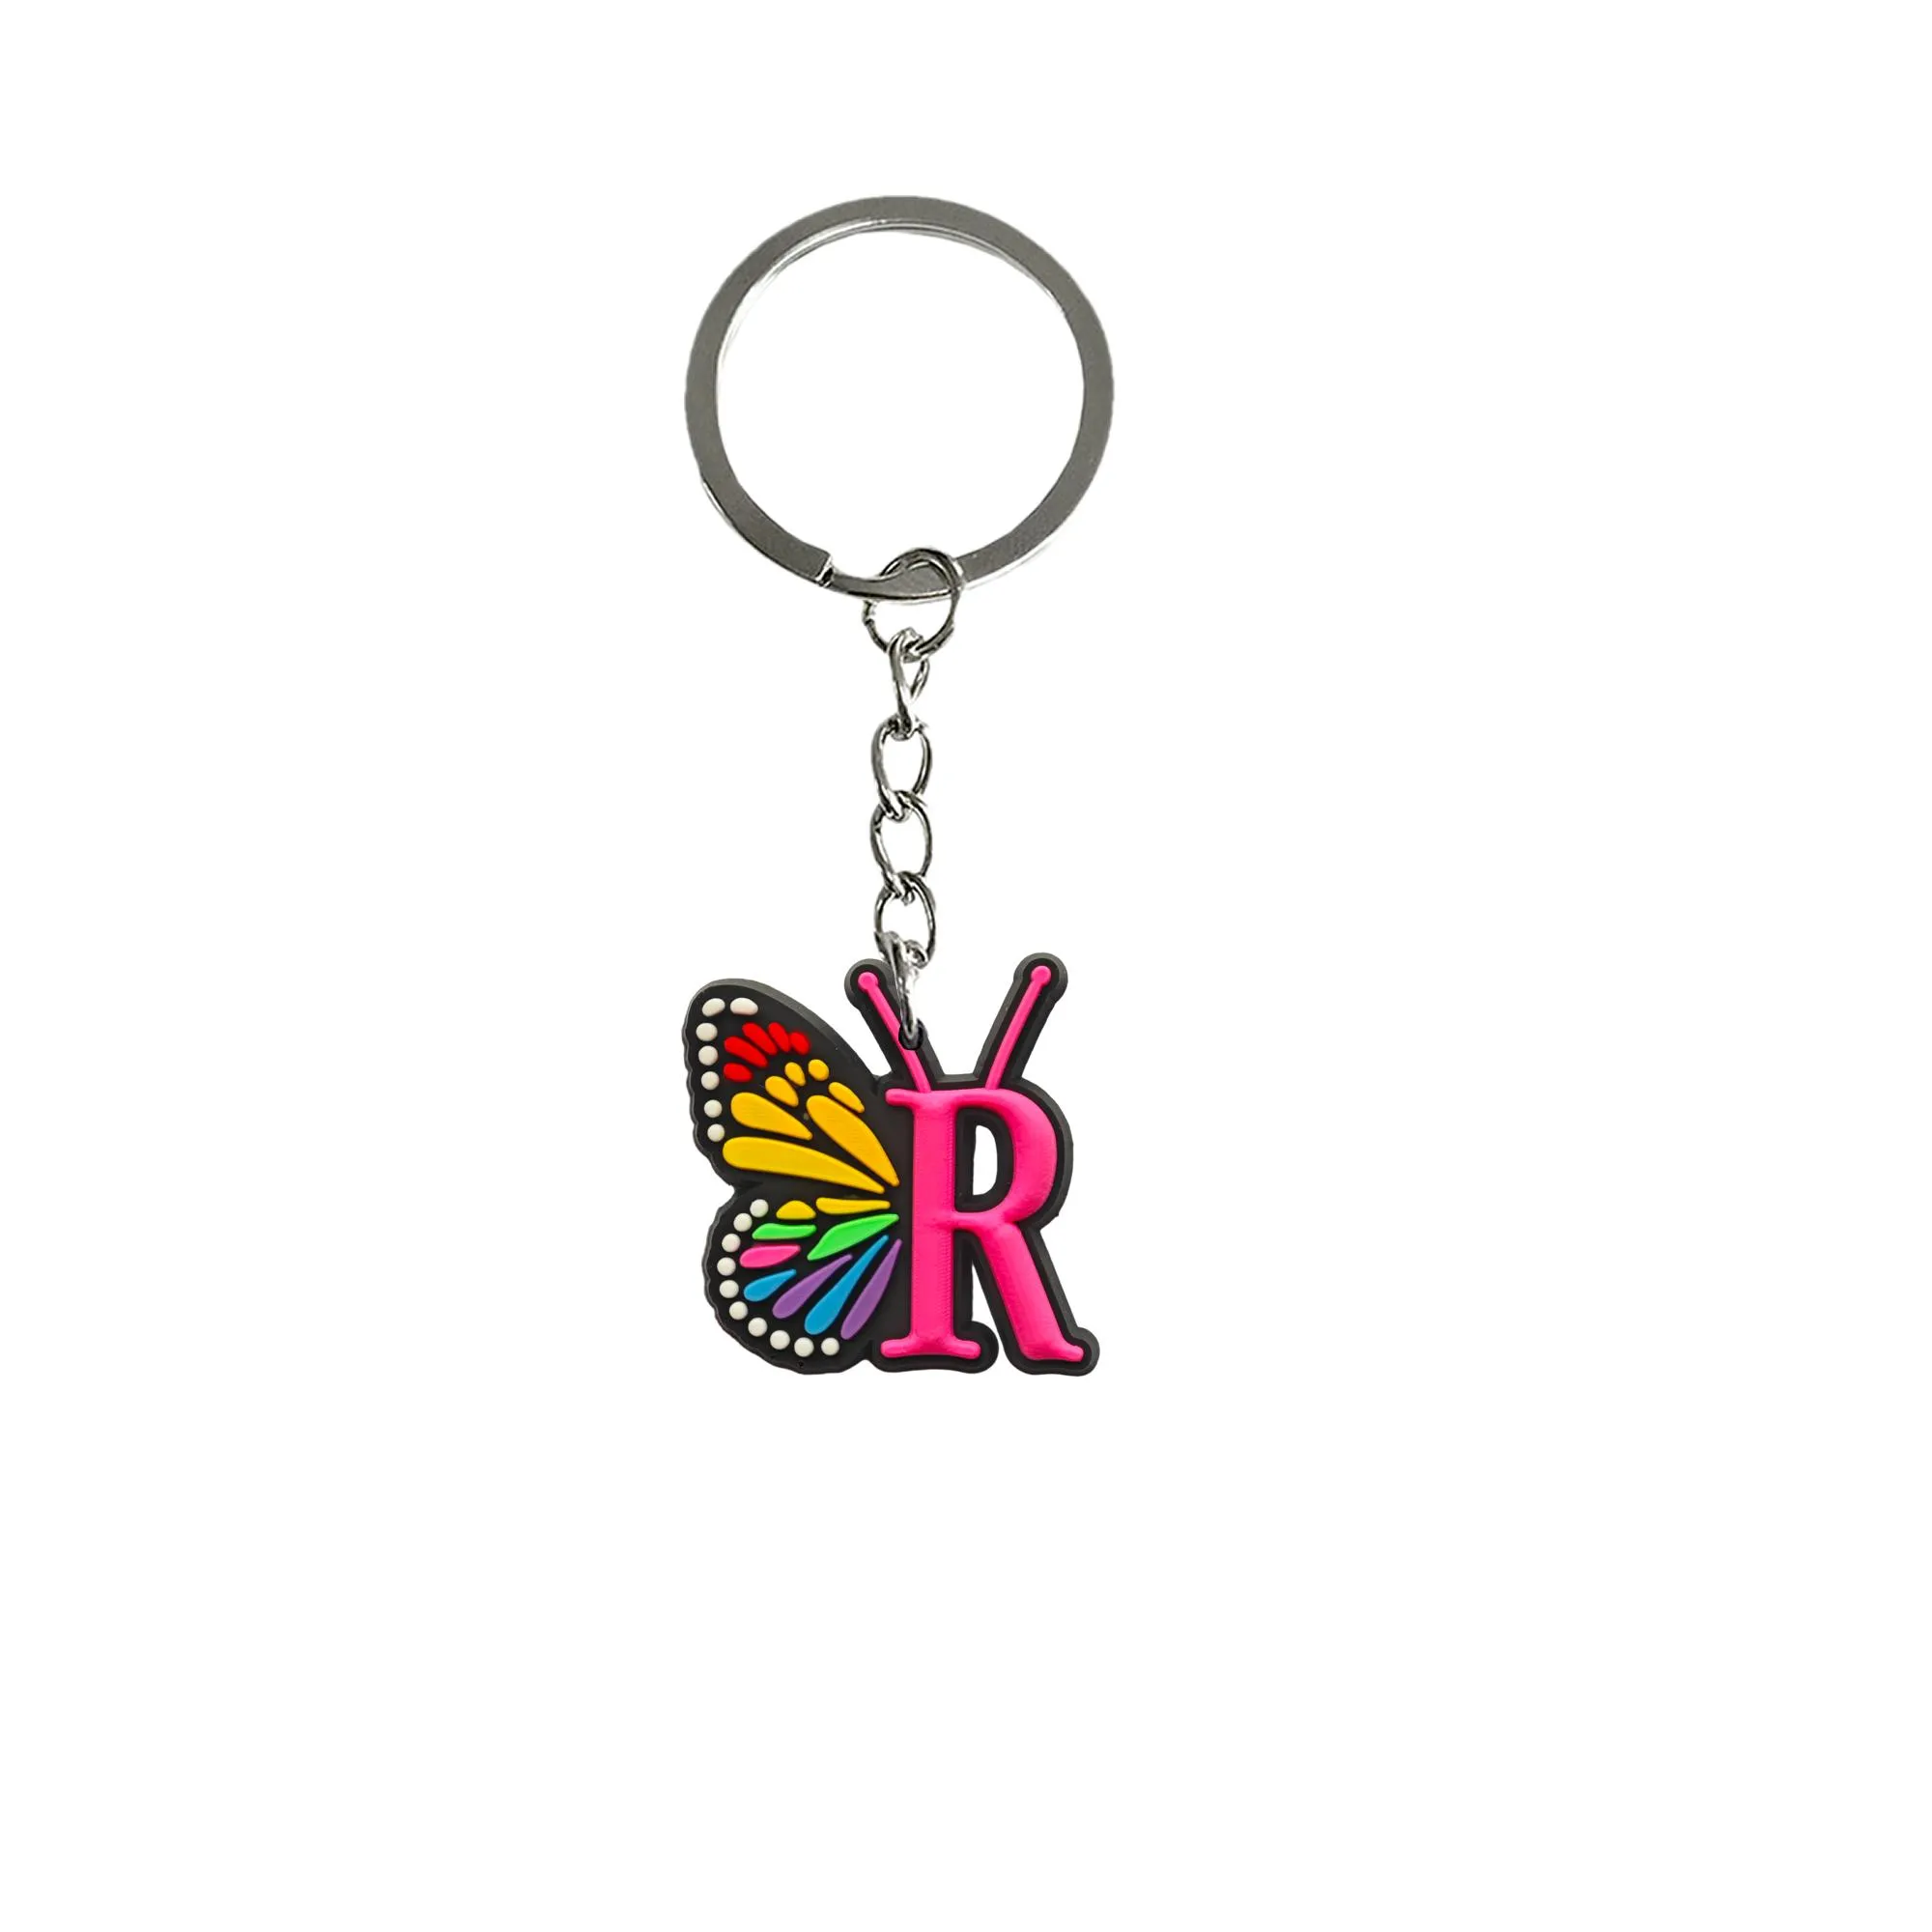 letter butterfly keychain mini cute keyring for classroom prizes boys keychains key chain kid boy girl party favors gift suitable schoolbag goodie bag stuffers supplies